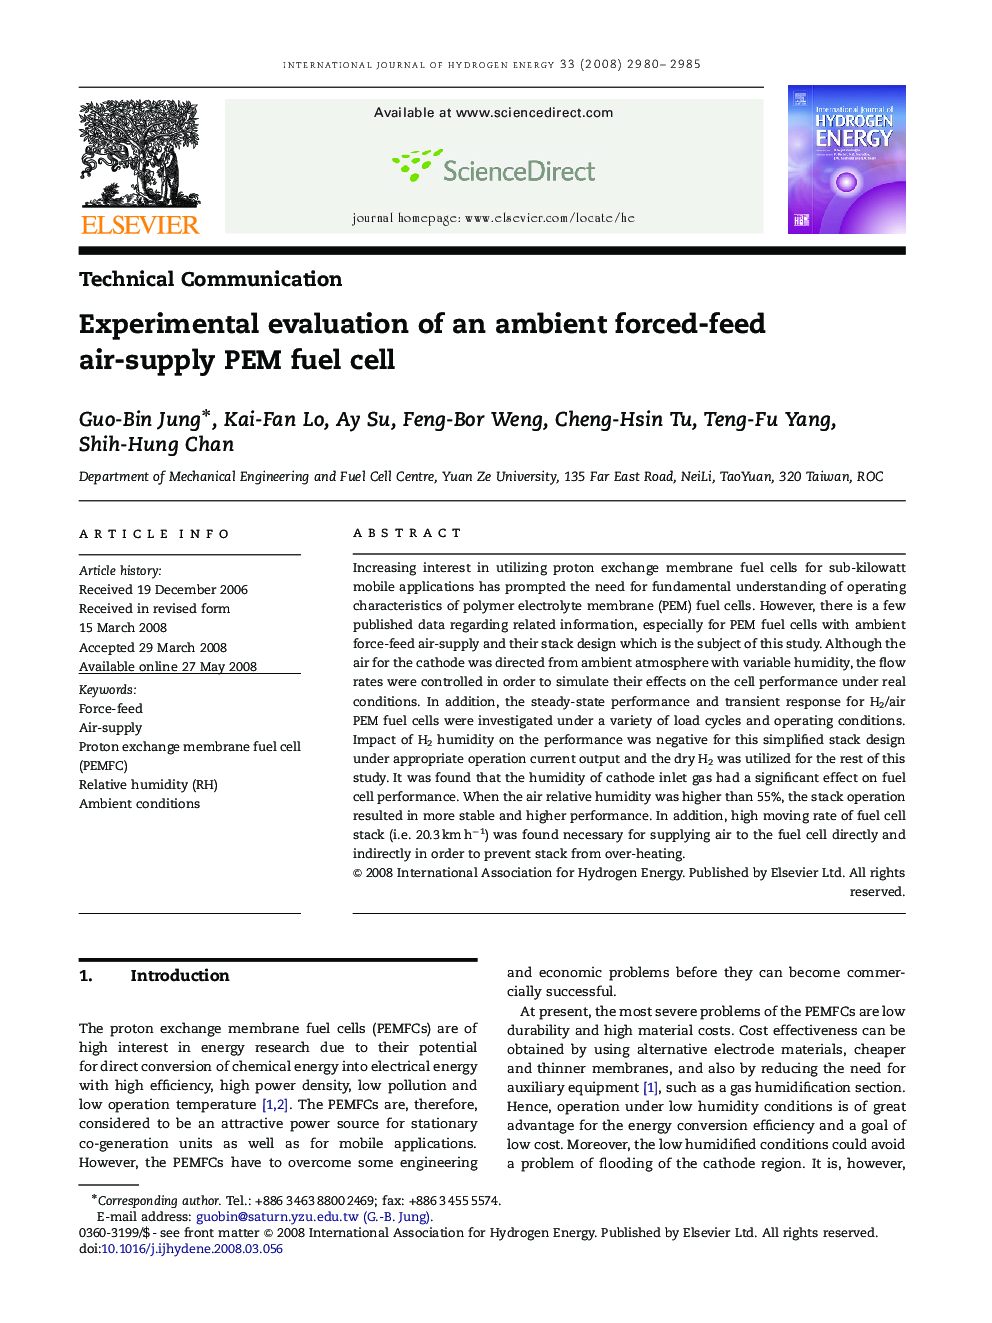 Experimental evaluation of an ambient forced-feed air-supply PEM fuel cell